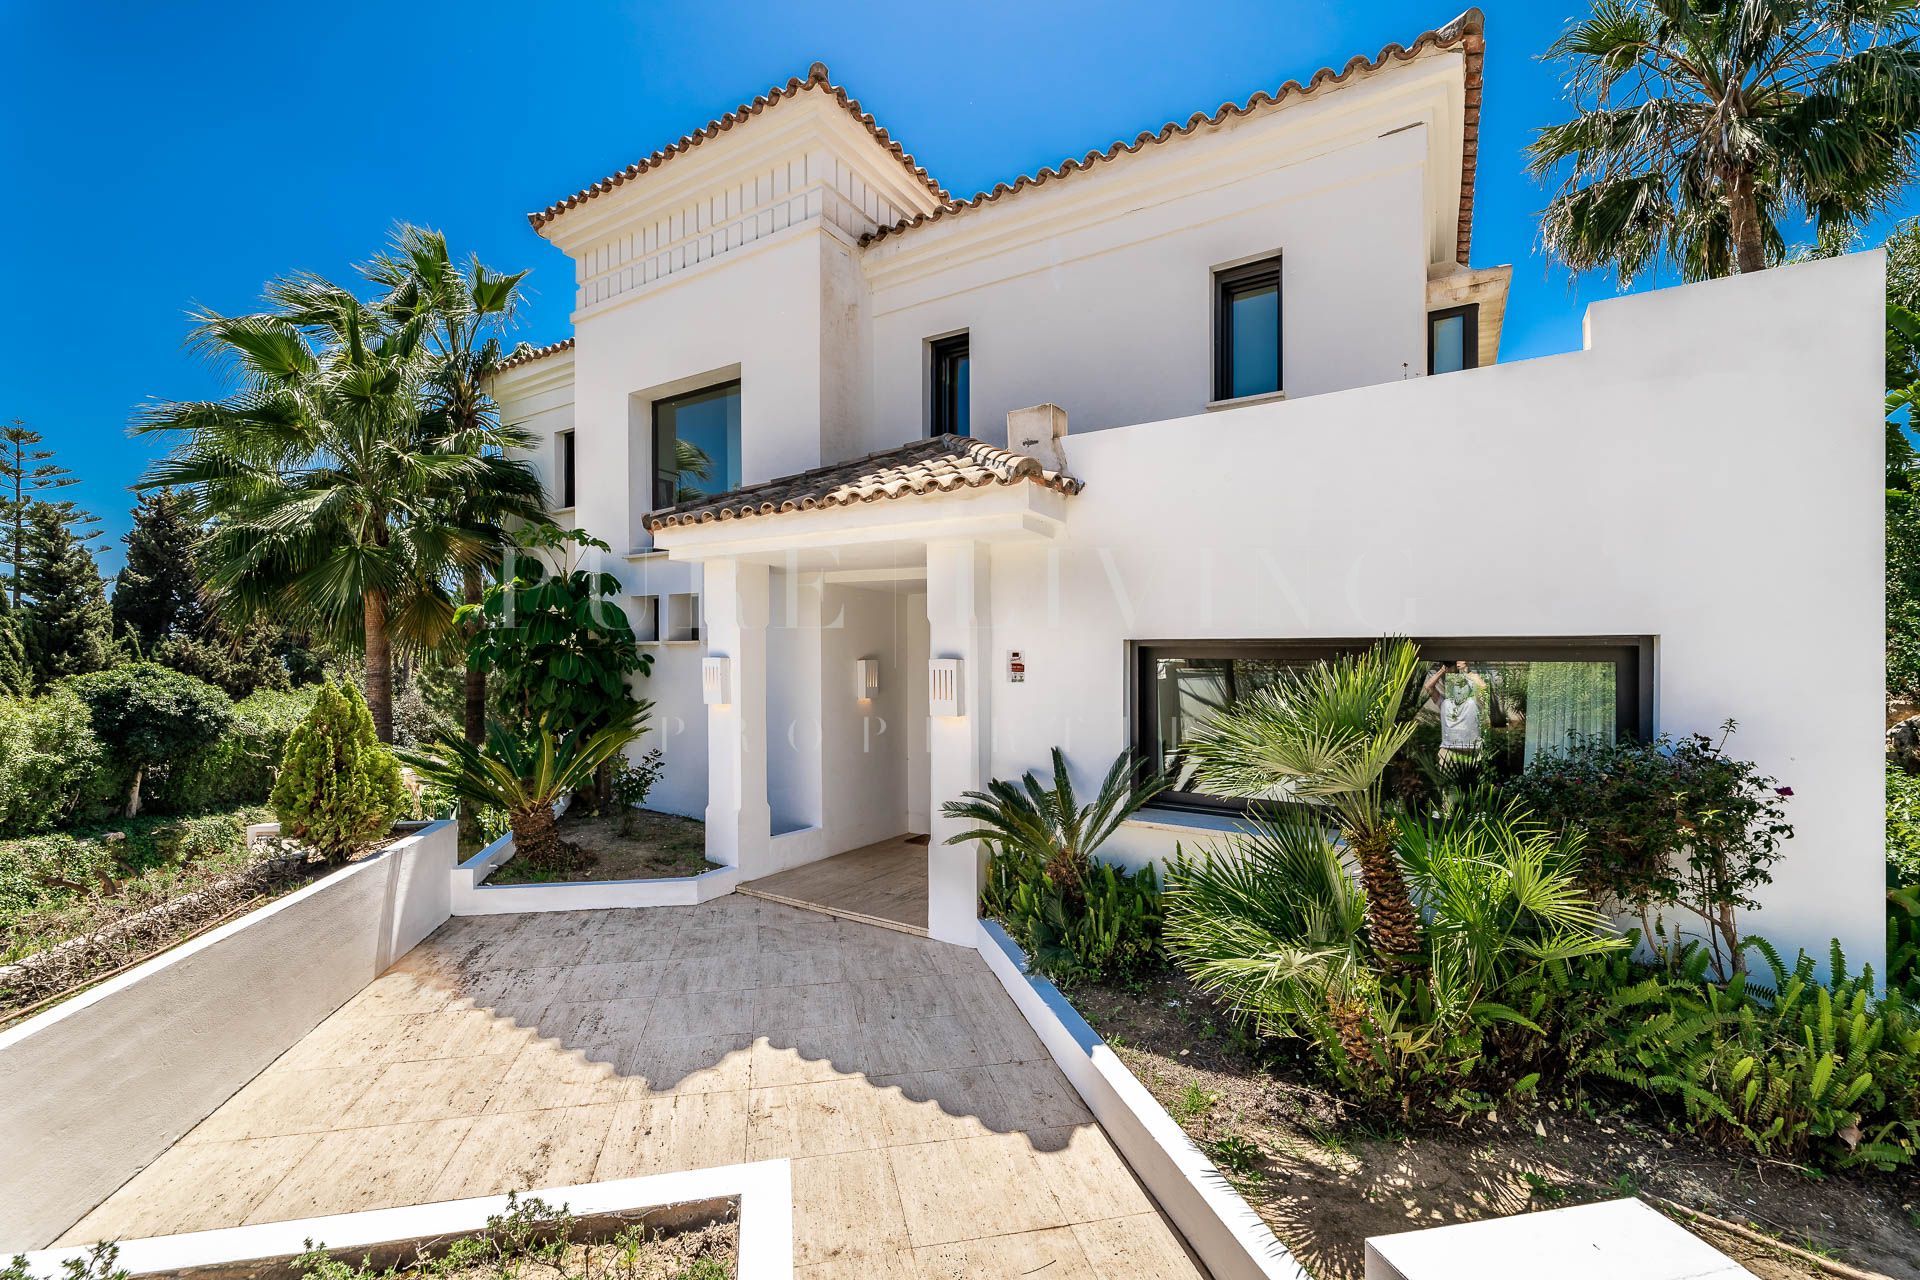 Exceptional villa boasting sea views, situated within a gated community in Lomas de Magna on the prestigious Golden Mile